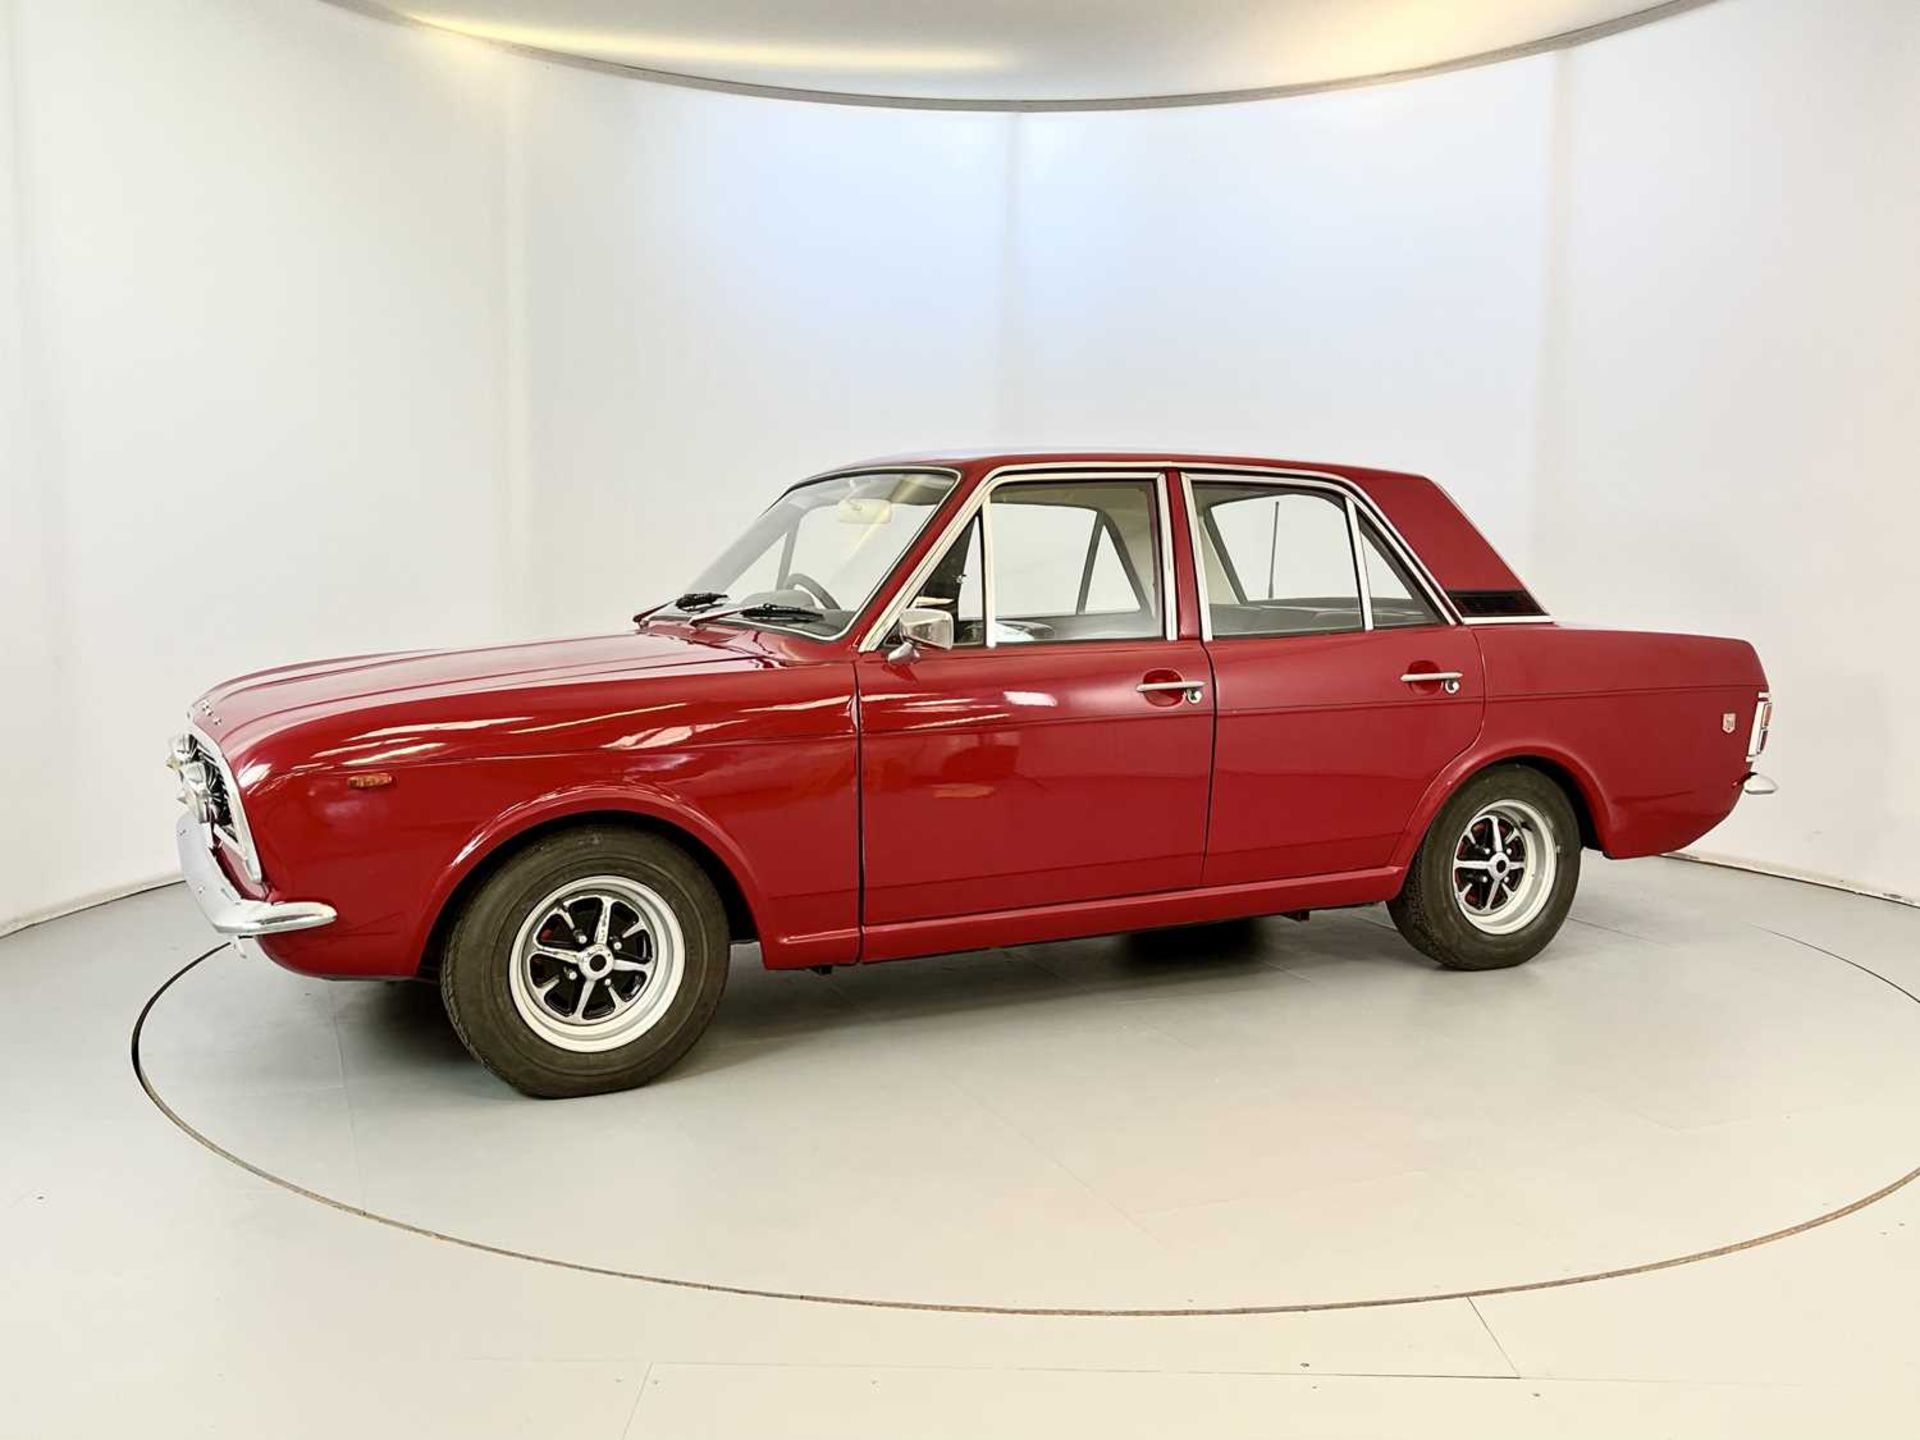 1967 Ford Cortina 1600GT - Image 4 of 37